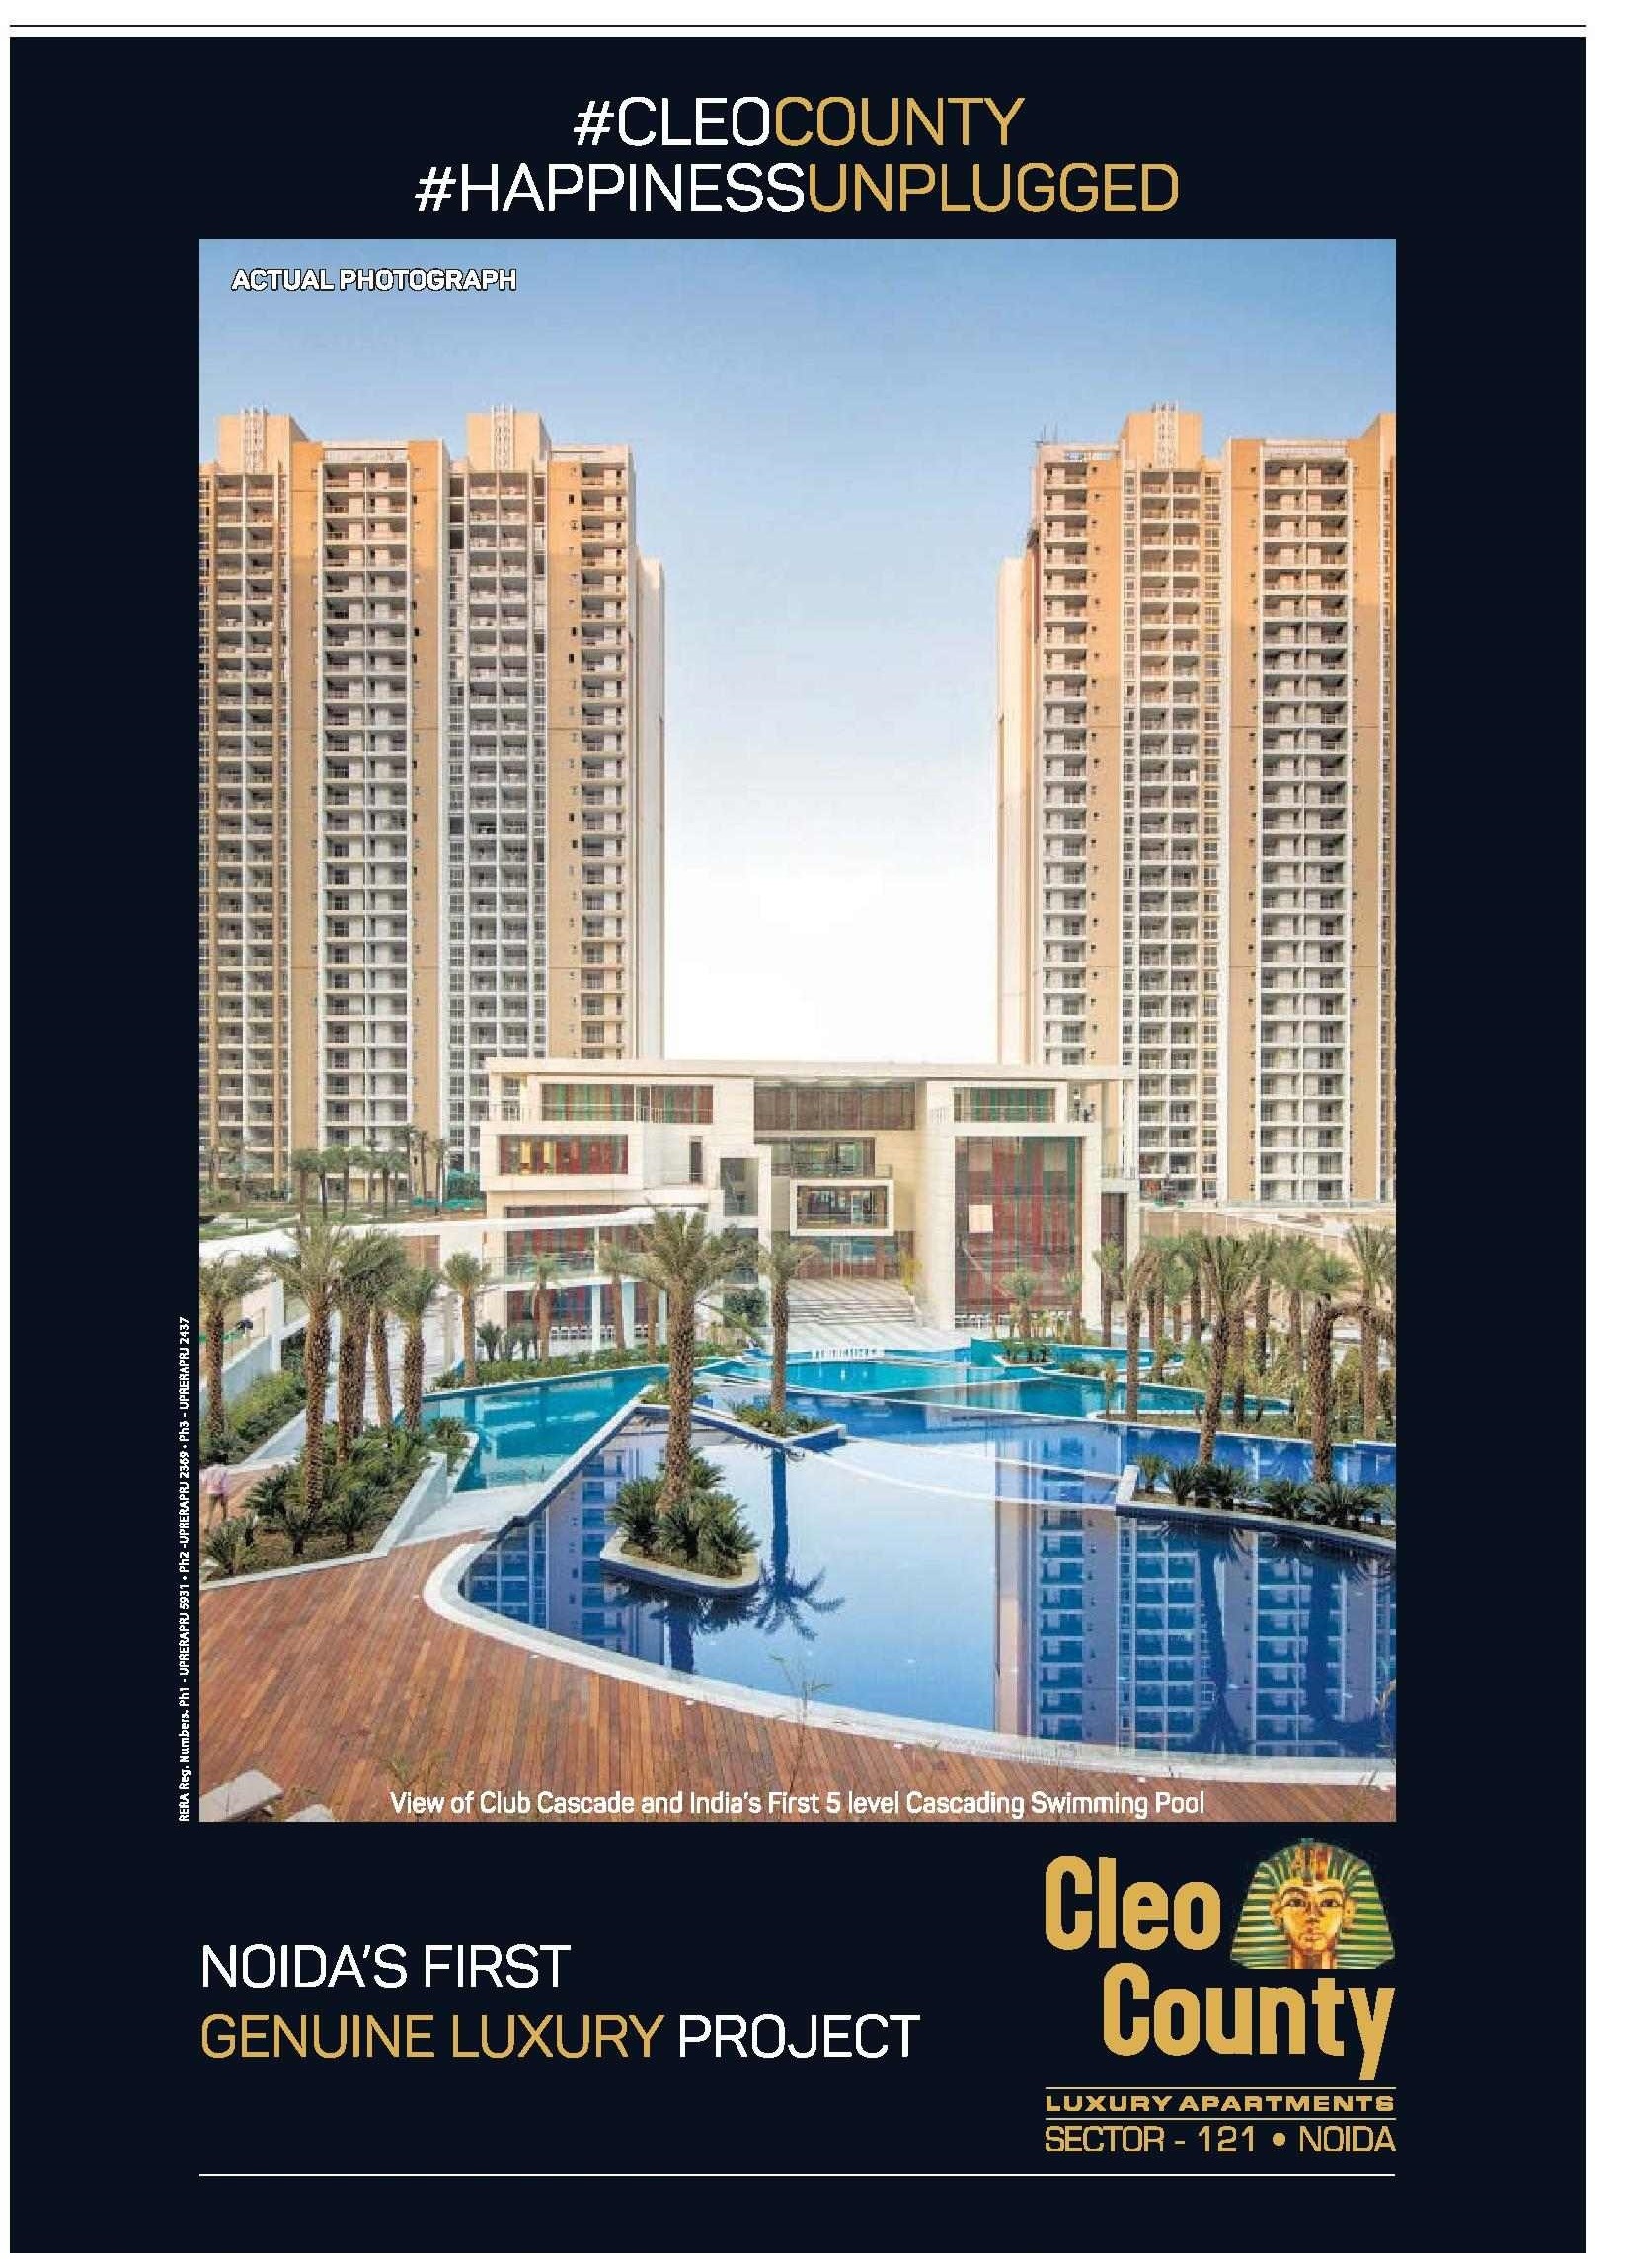 Book luxury apartments at ABA Cleo County in Noida Update